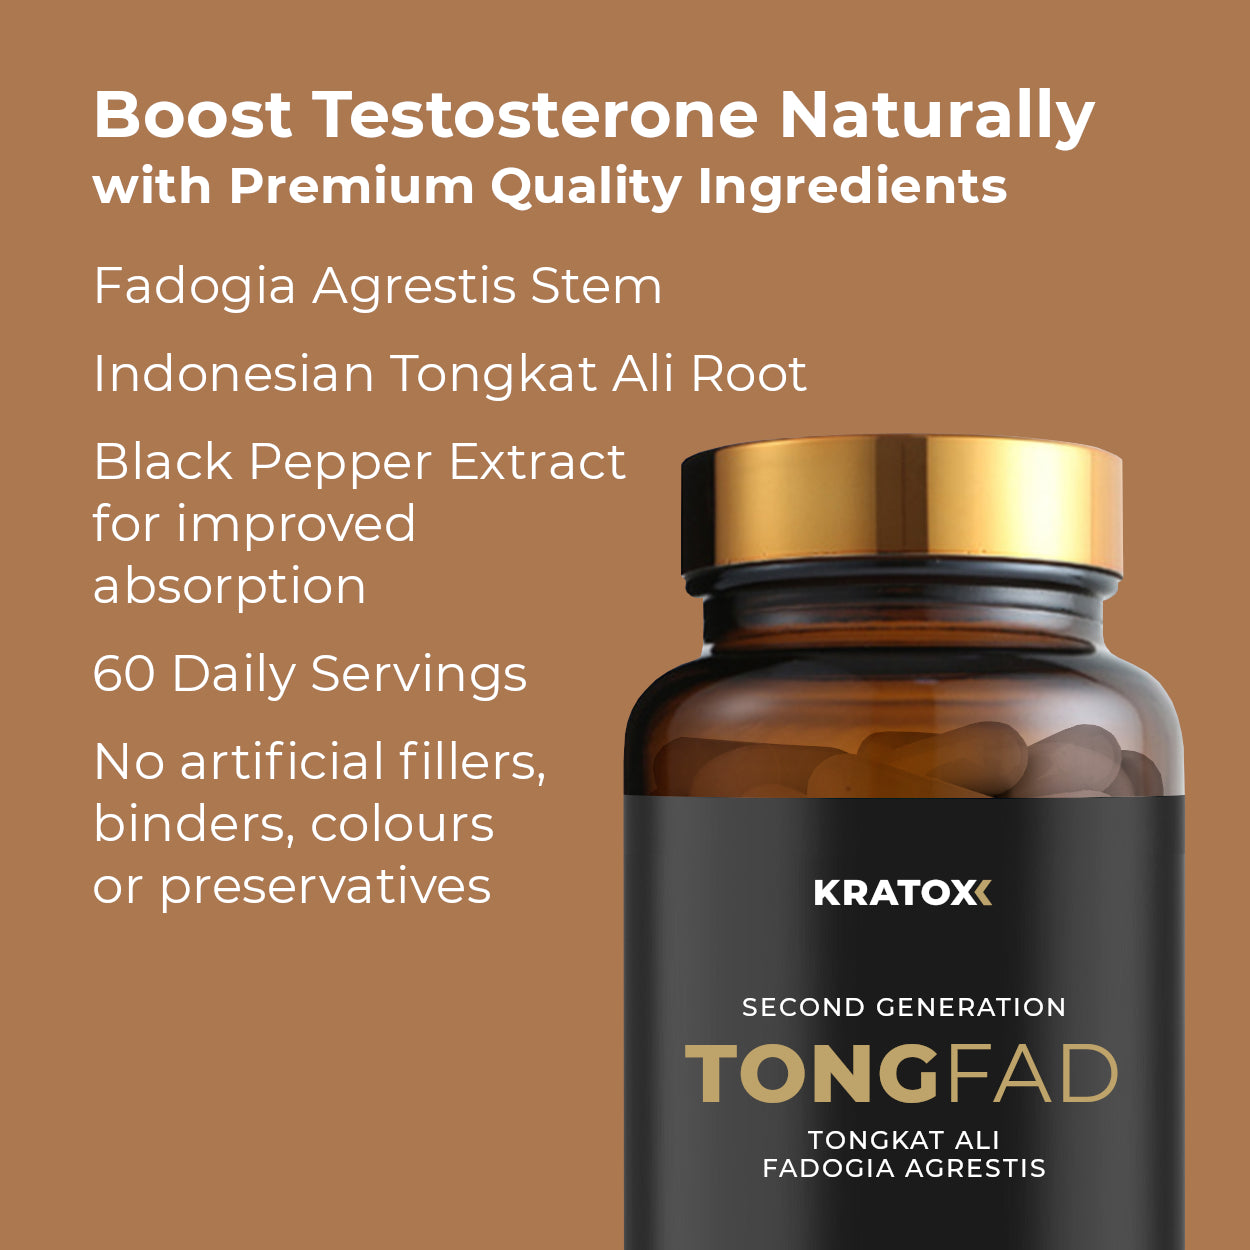 TongFad - testosterone-bosting supplement with Indonesian Tongkat Ali and Fadogia Agrestis